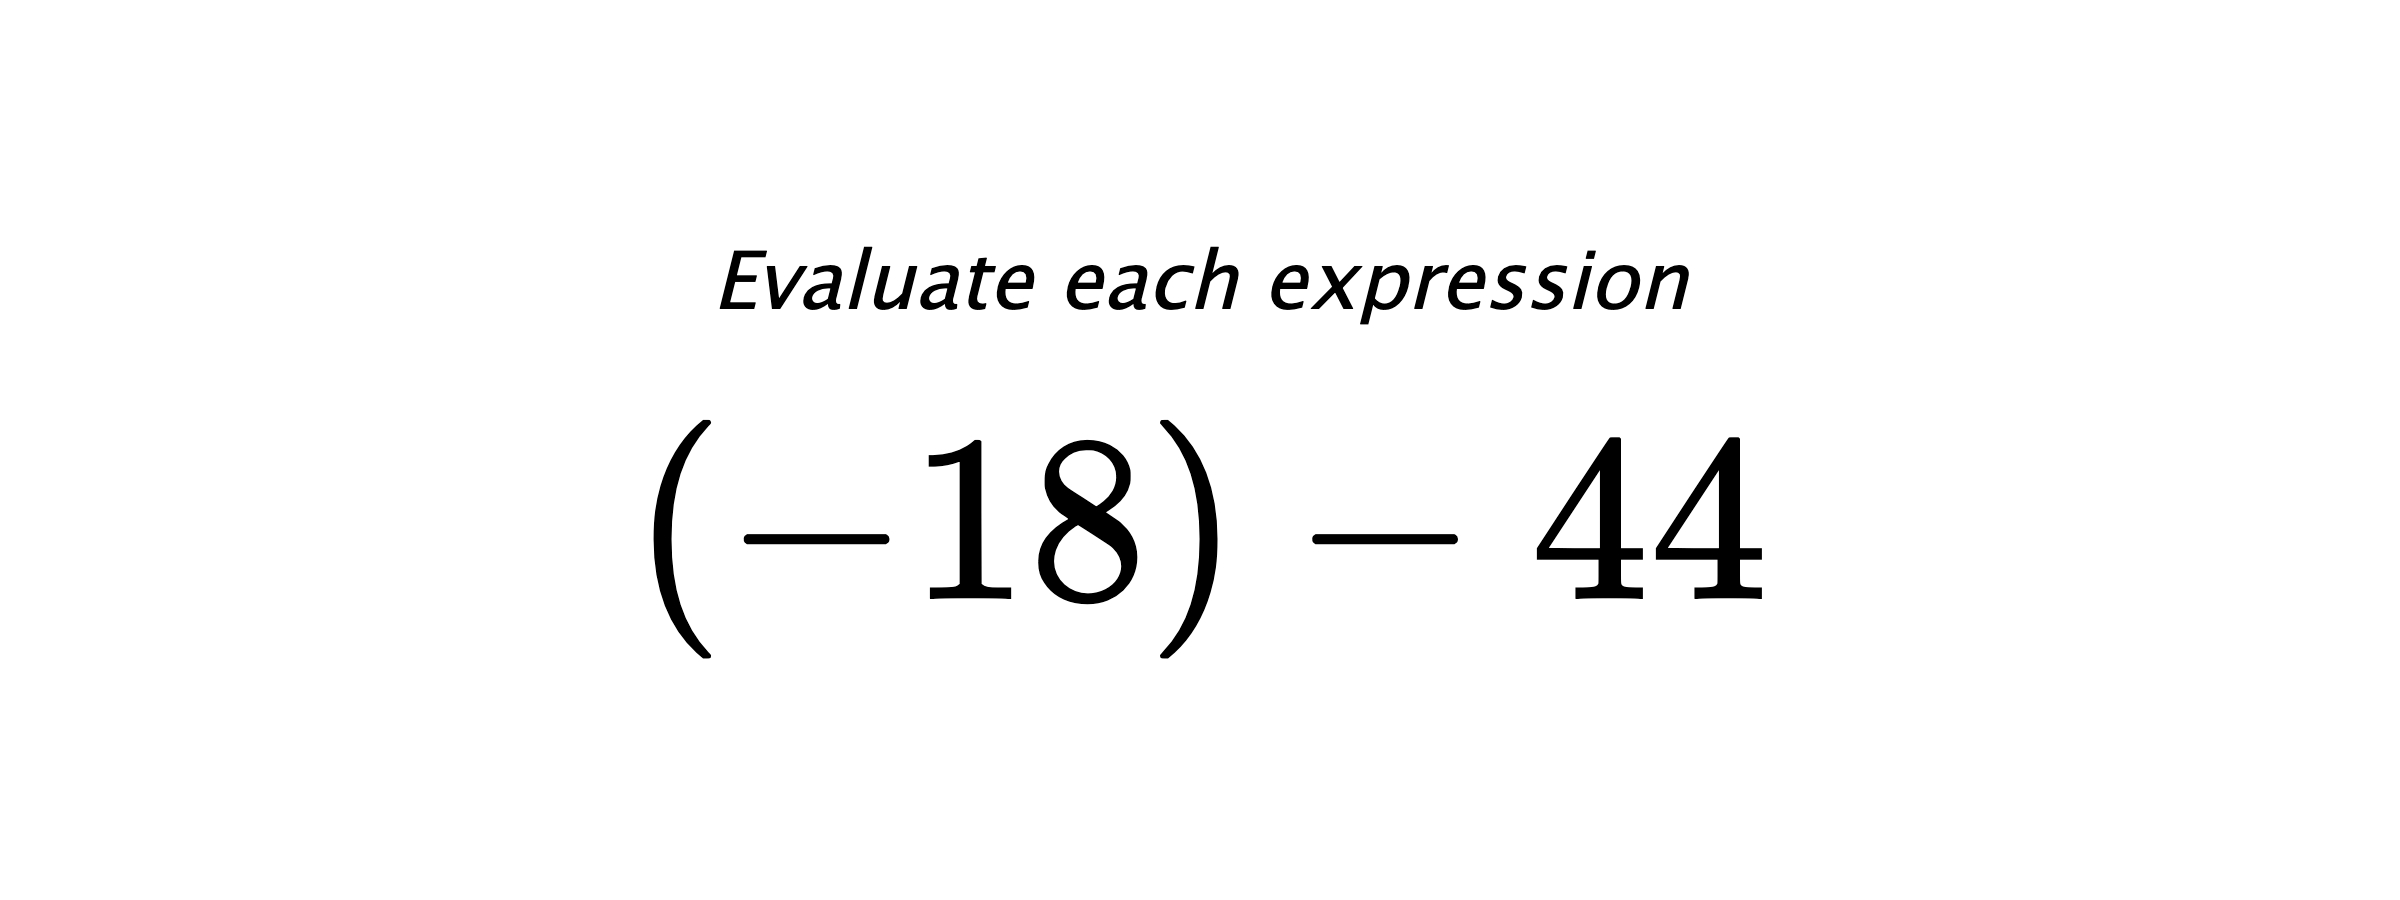 Evaluate each expression $ (-18)-44 $